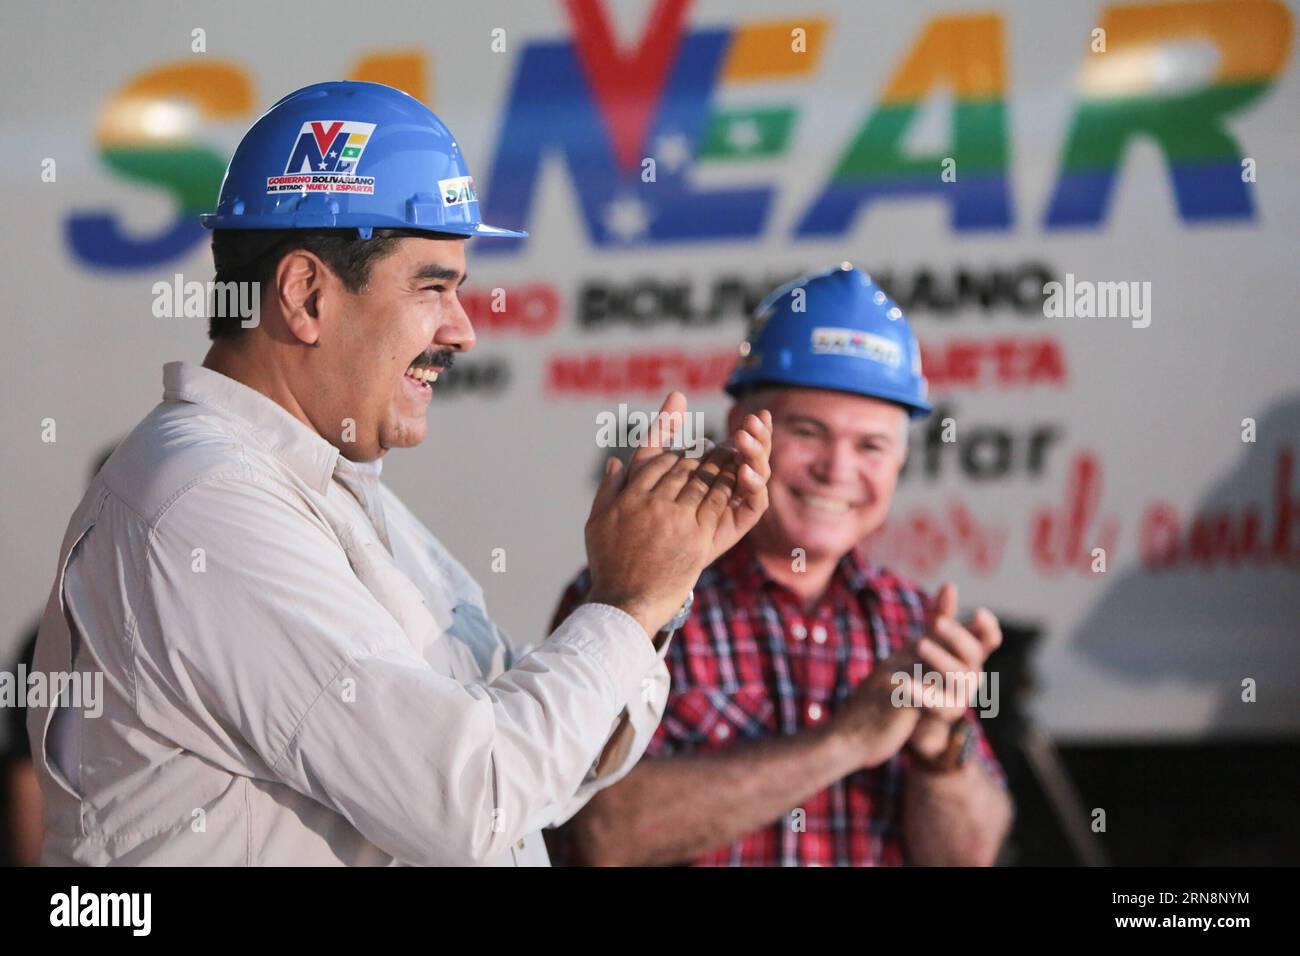 Oct. 31, 2015 -- Image provided by Venezuela s Presidency shows Venezuelan President Nicolas Maduro (L) presiding over the opening ceremony of a processing plant for solid waste in the municipality of Diaz, Nueva Esparta, Venezuela, on Oct. 31, 2015. According to local press, Nicolas Maduro announced the building plan of 10 new waste treatment plants in several states during the ceremony.Venezuela s Presidency) VENEZUELA-NUEVA ESPARTA-POLITICS-MADURO e BorisxVergara PUBLICATIONxNOTxINxCHN   OCT 31 2015 Image provided by Venezuela S Presidency Shows Venezuelan President Nicolas Maduro l Presidi Stock Photo